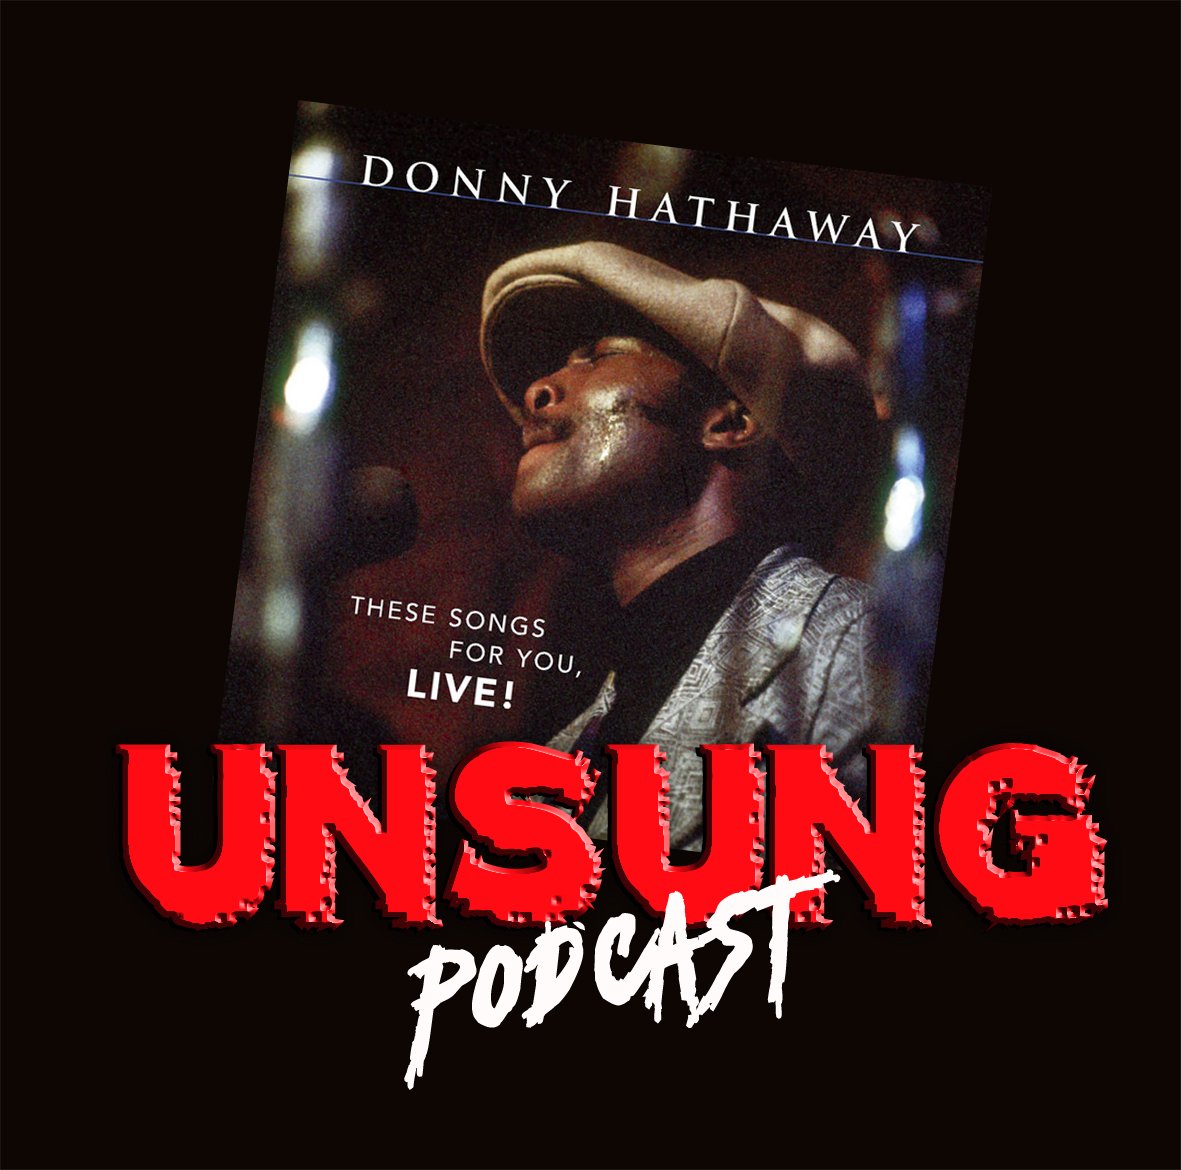 Episode 235 - These Songs for You, Live! by Donny Hathaway